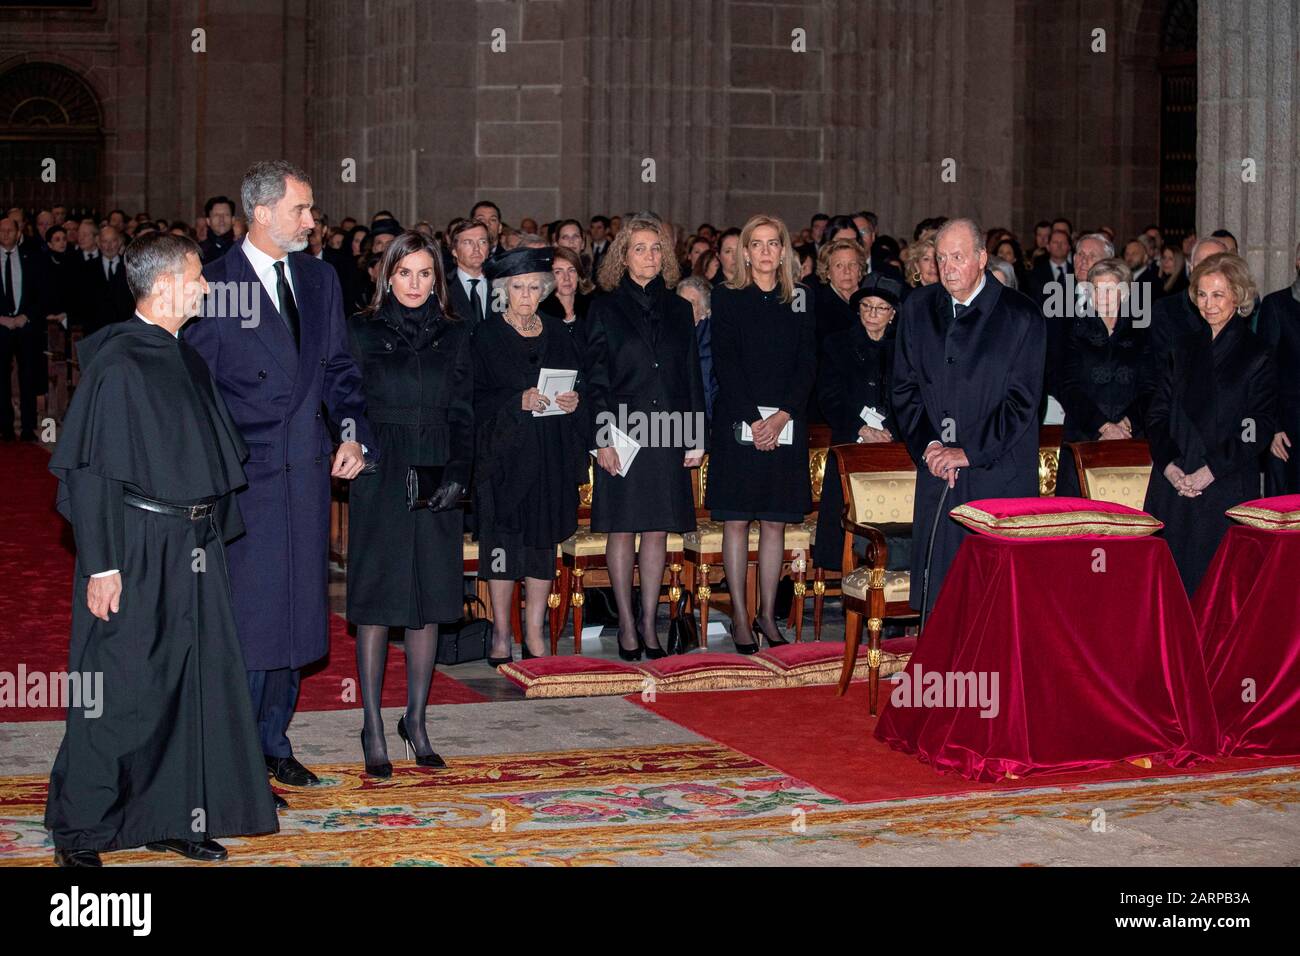 Spain's King Felipe VI (2-L) and Queen Letizia (3-L); Dutch Princess Beatrix (4-L); Spanish princesses Elena de Borbon (5-L) and Cristina de Borbon (6-L); Spain's Emeritus King Juan Carlos I (3-R) and Queen Sofia (R) attend the funeral of Spanish princess Pilar de Borbon, Duchess of Badajoz and Monarch' aunt, at the Real Monasterio de San Lorenzo basilica, in El Escorial, outside Madrid, Spain, 29 January 2020. More than 200 people attend the funeral, held 21 days after the death of the princess at 83. EFE/ Emilio Naranjo POOL Cordon Press Stock Photo